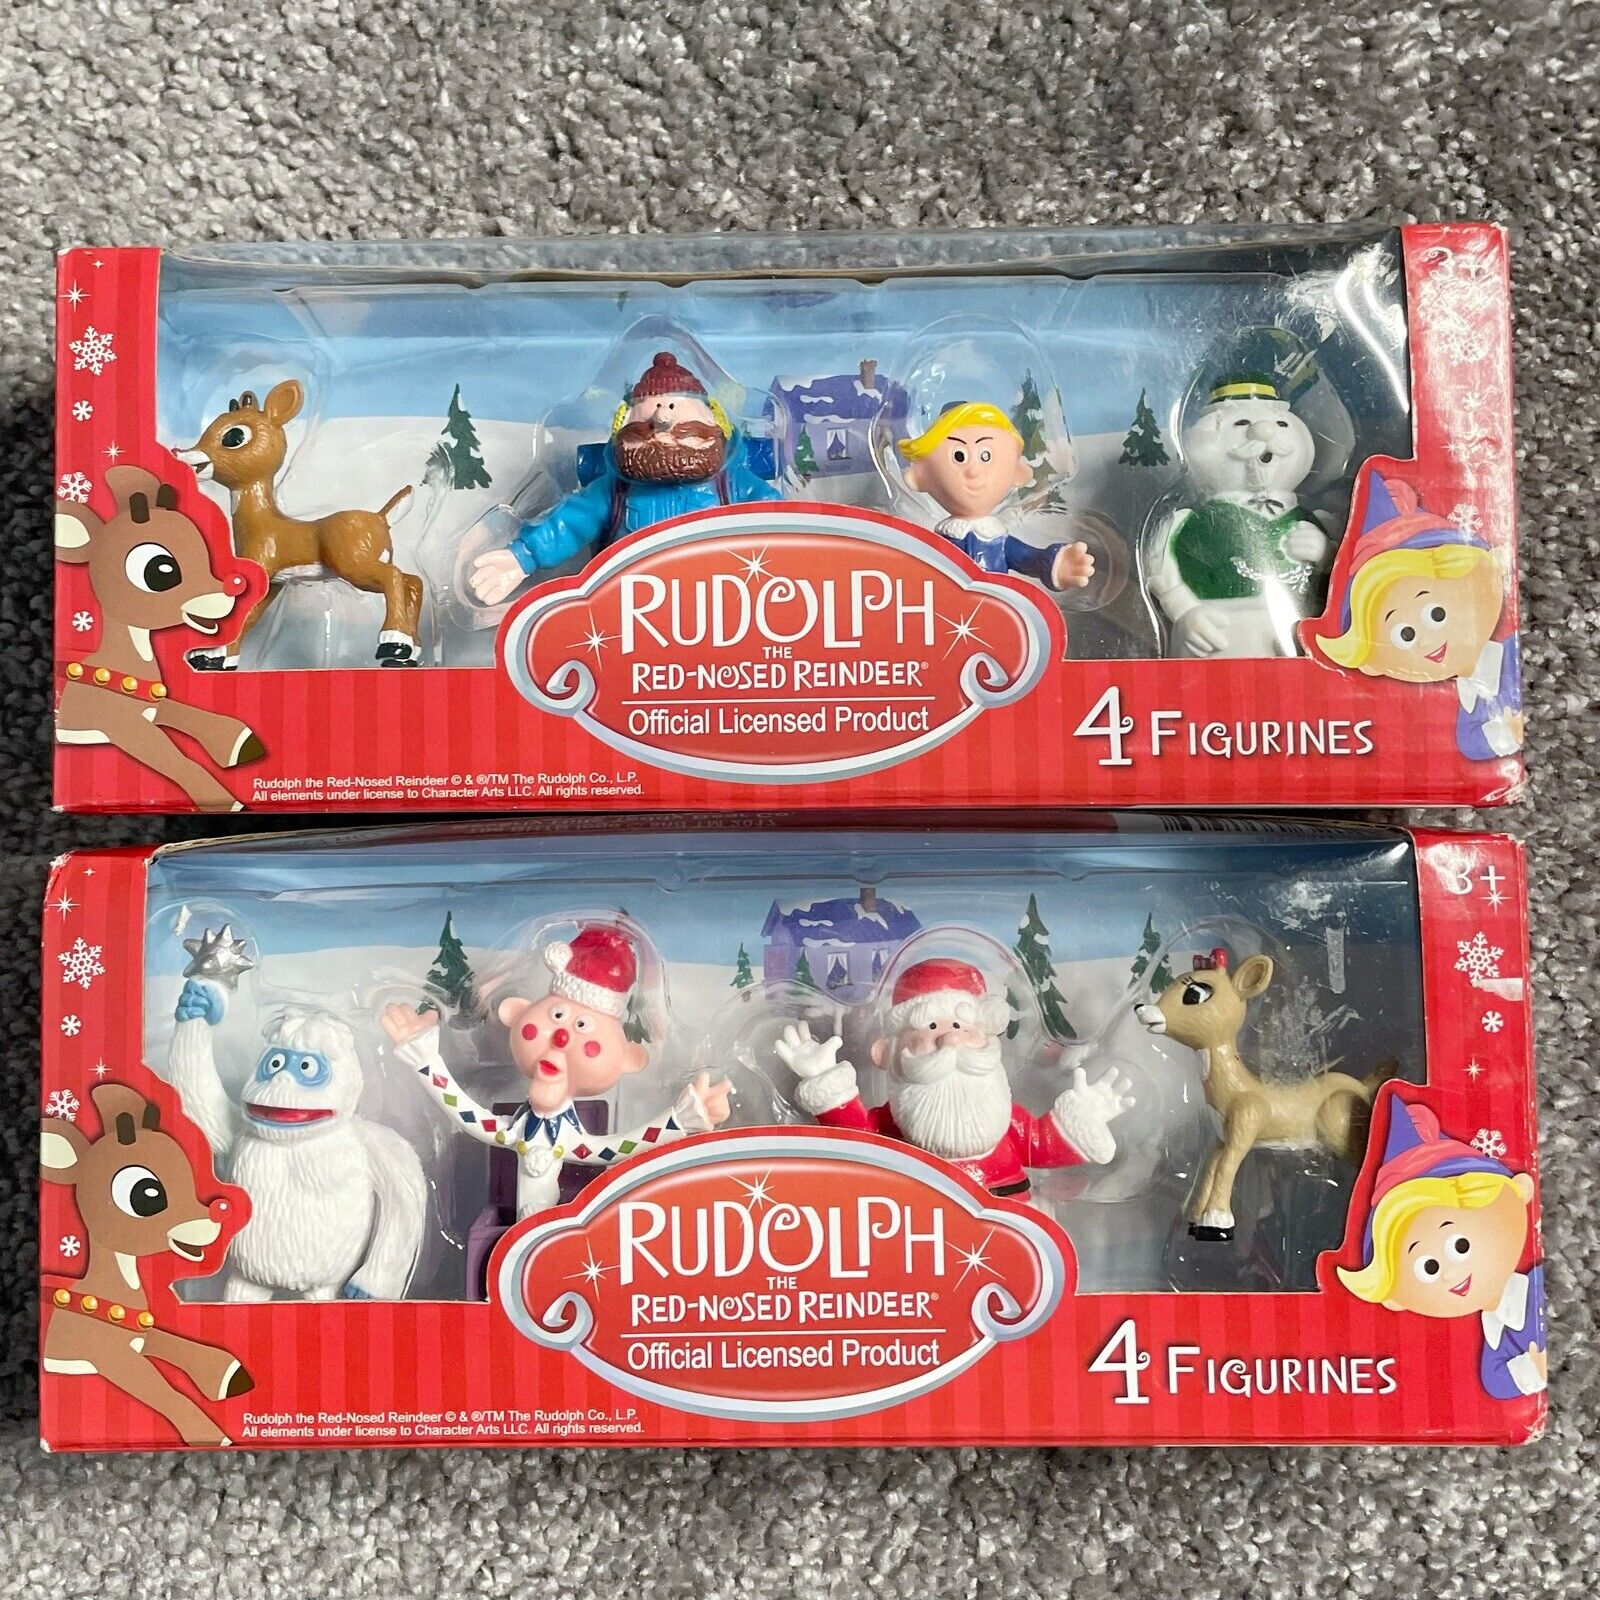 Rudolph the Red-Nosed Reindeer Holiday Figures New 8 Piece Total 2 Boxes 4 Each